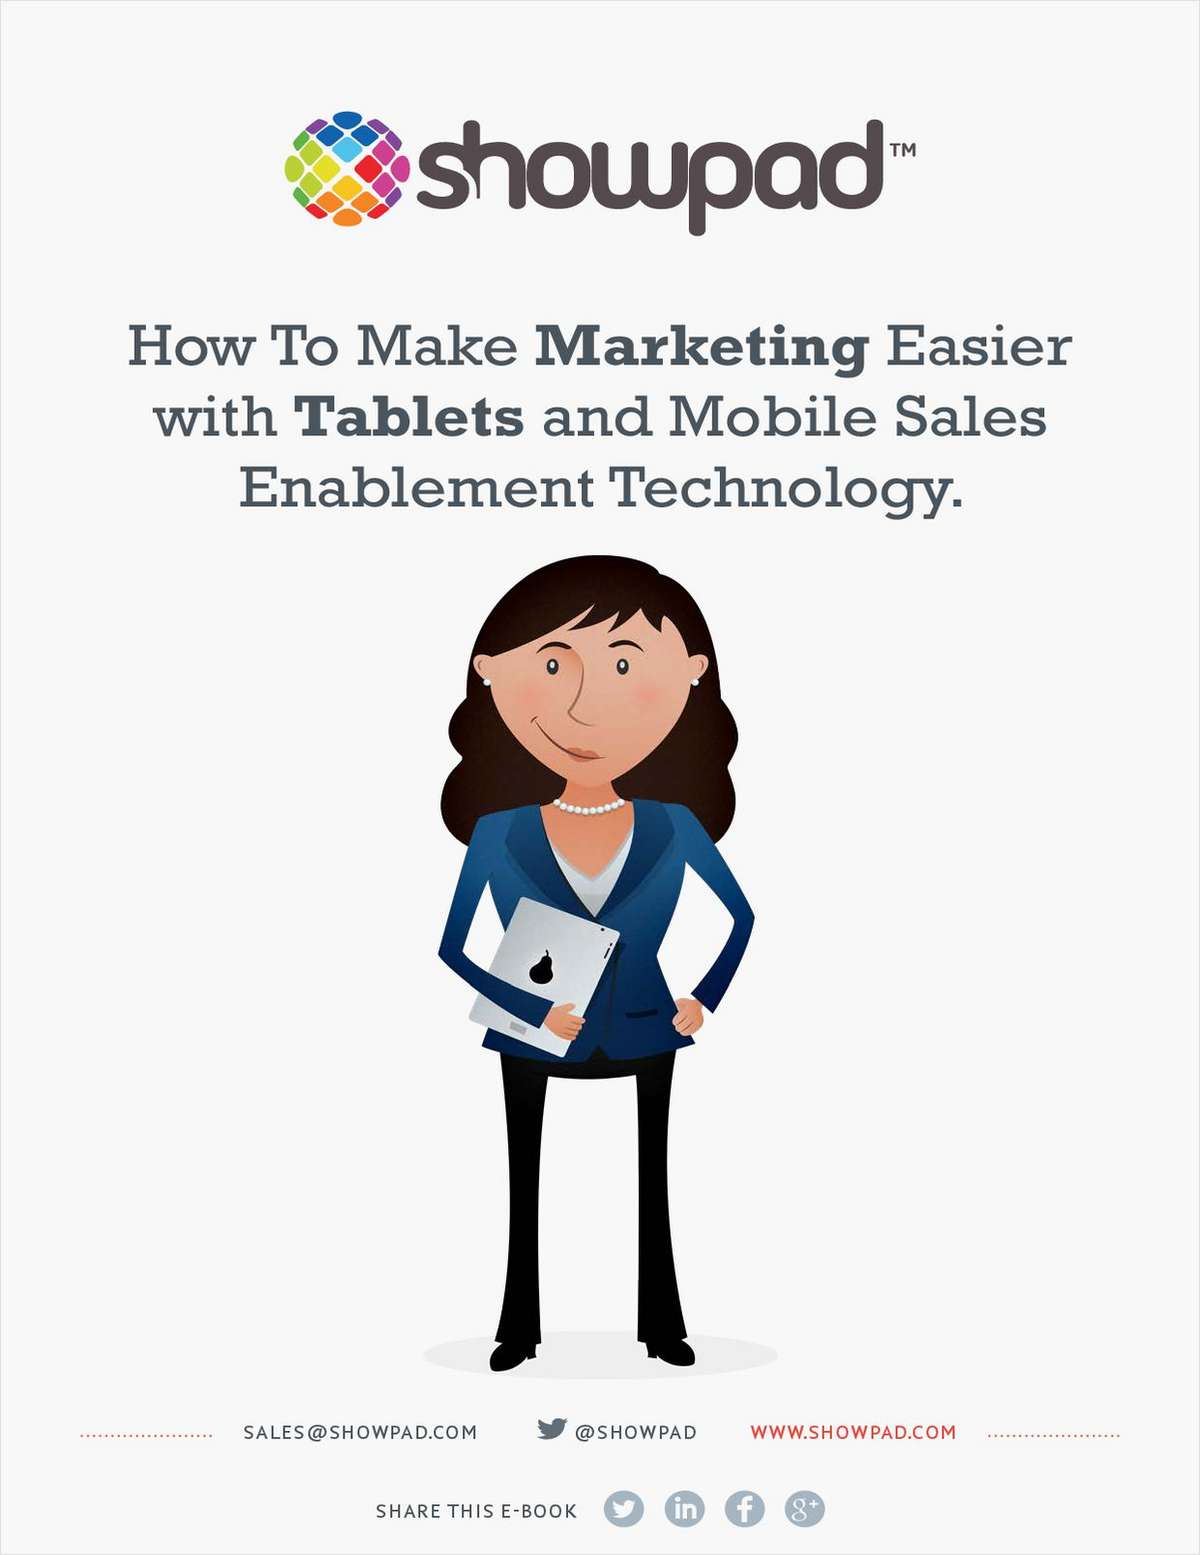 How to Make Marketing Easier with Tablets and Mobile Sales Enablement Technology